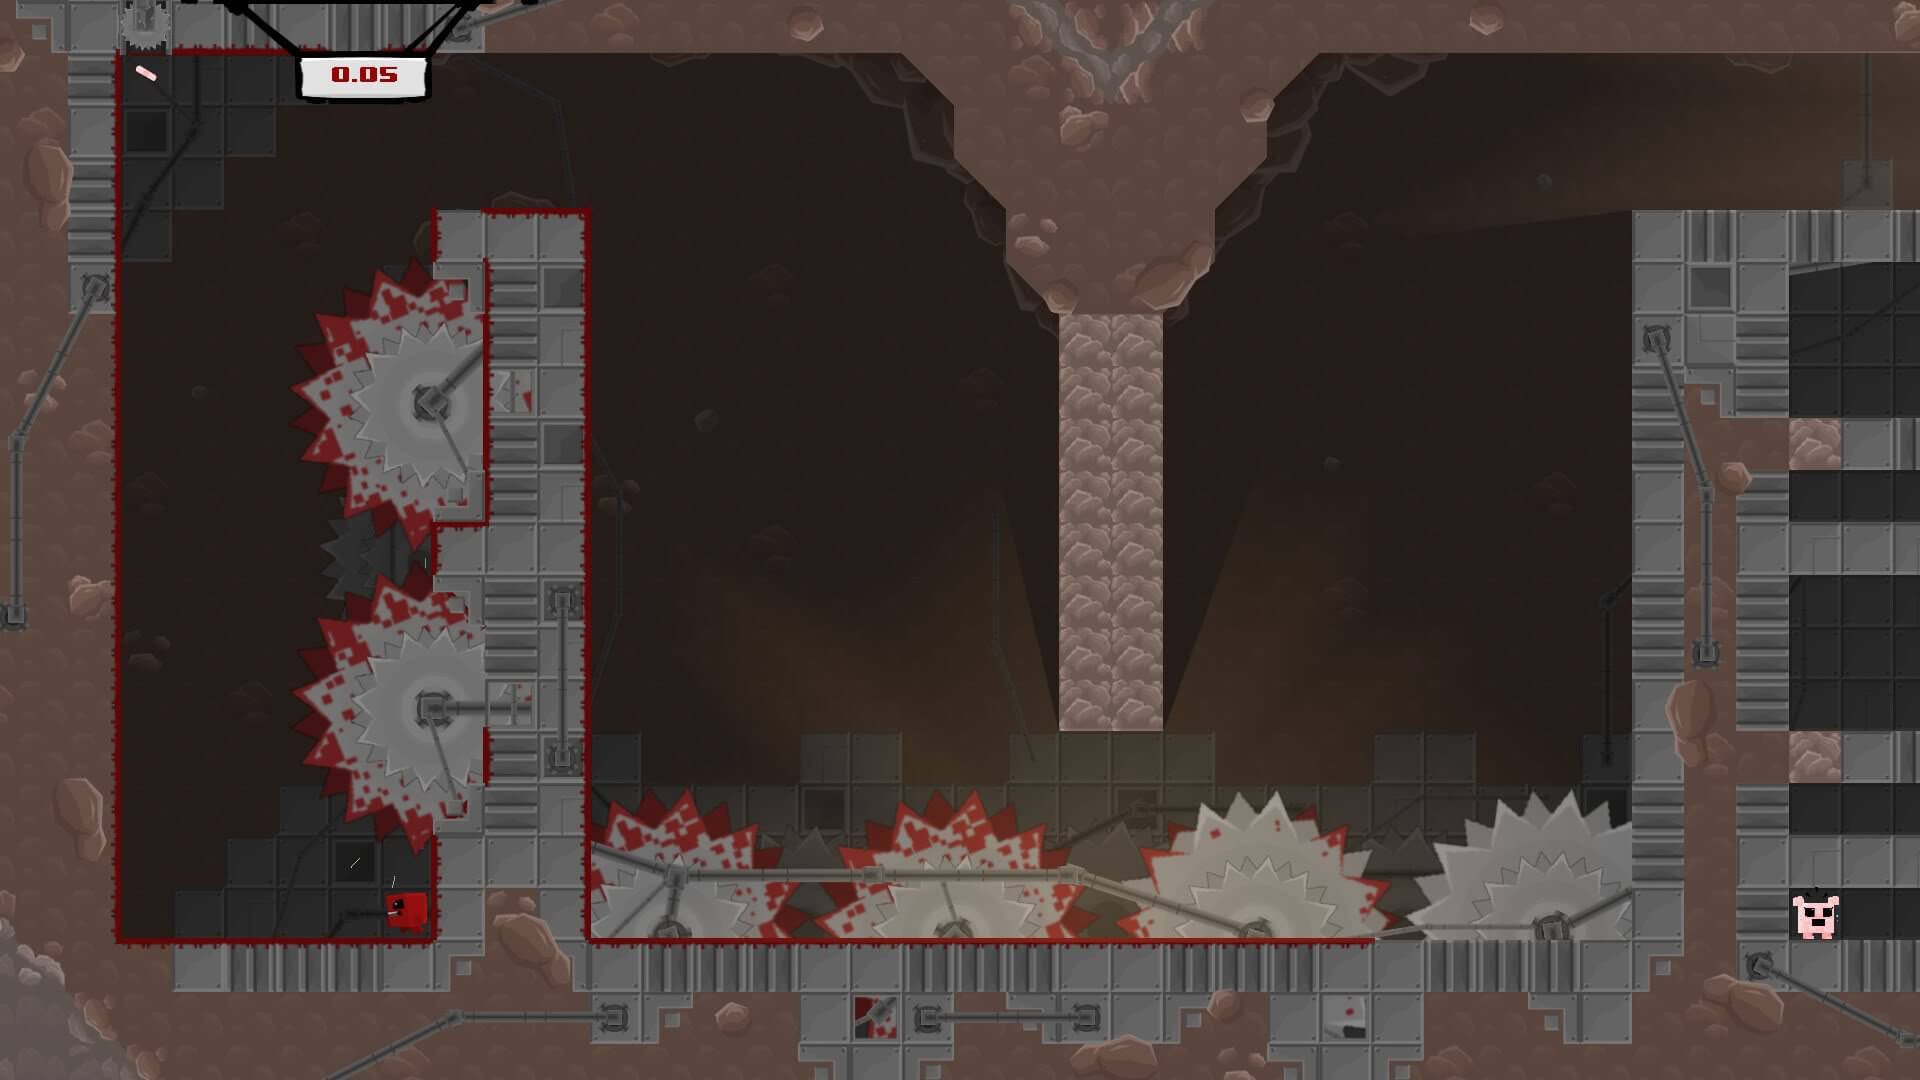  Super Meat Boy  Android.  